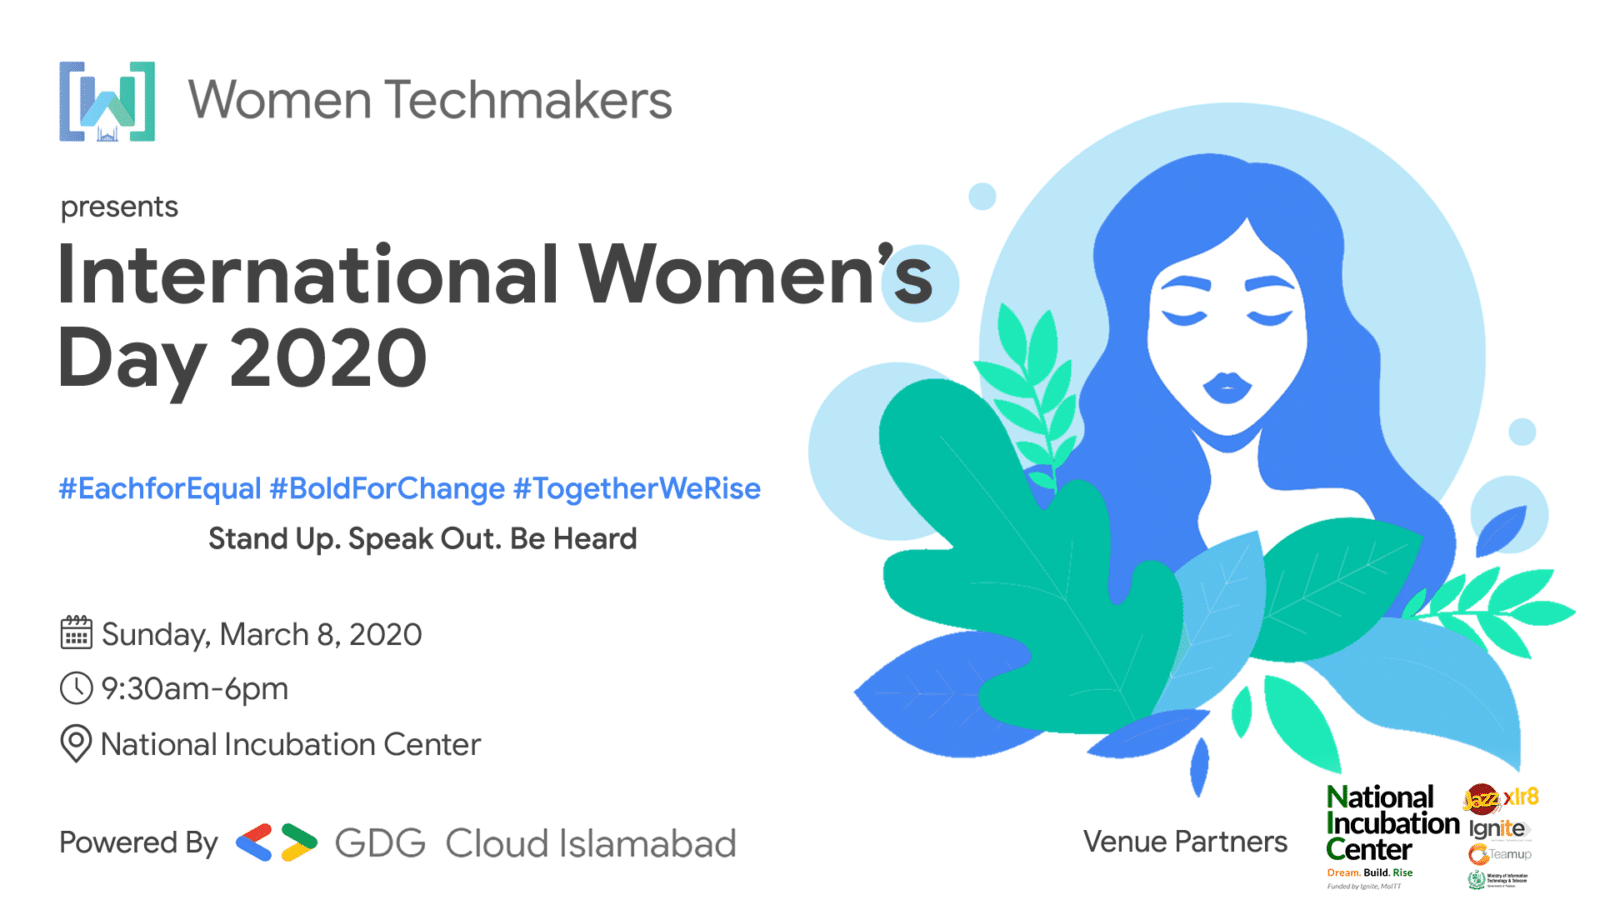 IWD Women TechMakers 2020 is Coming to the Twin Cities Next Month